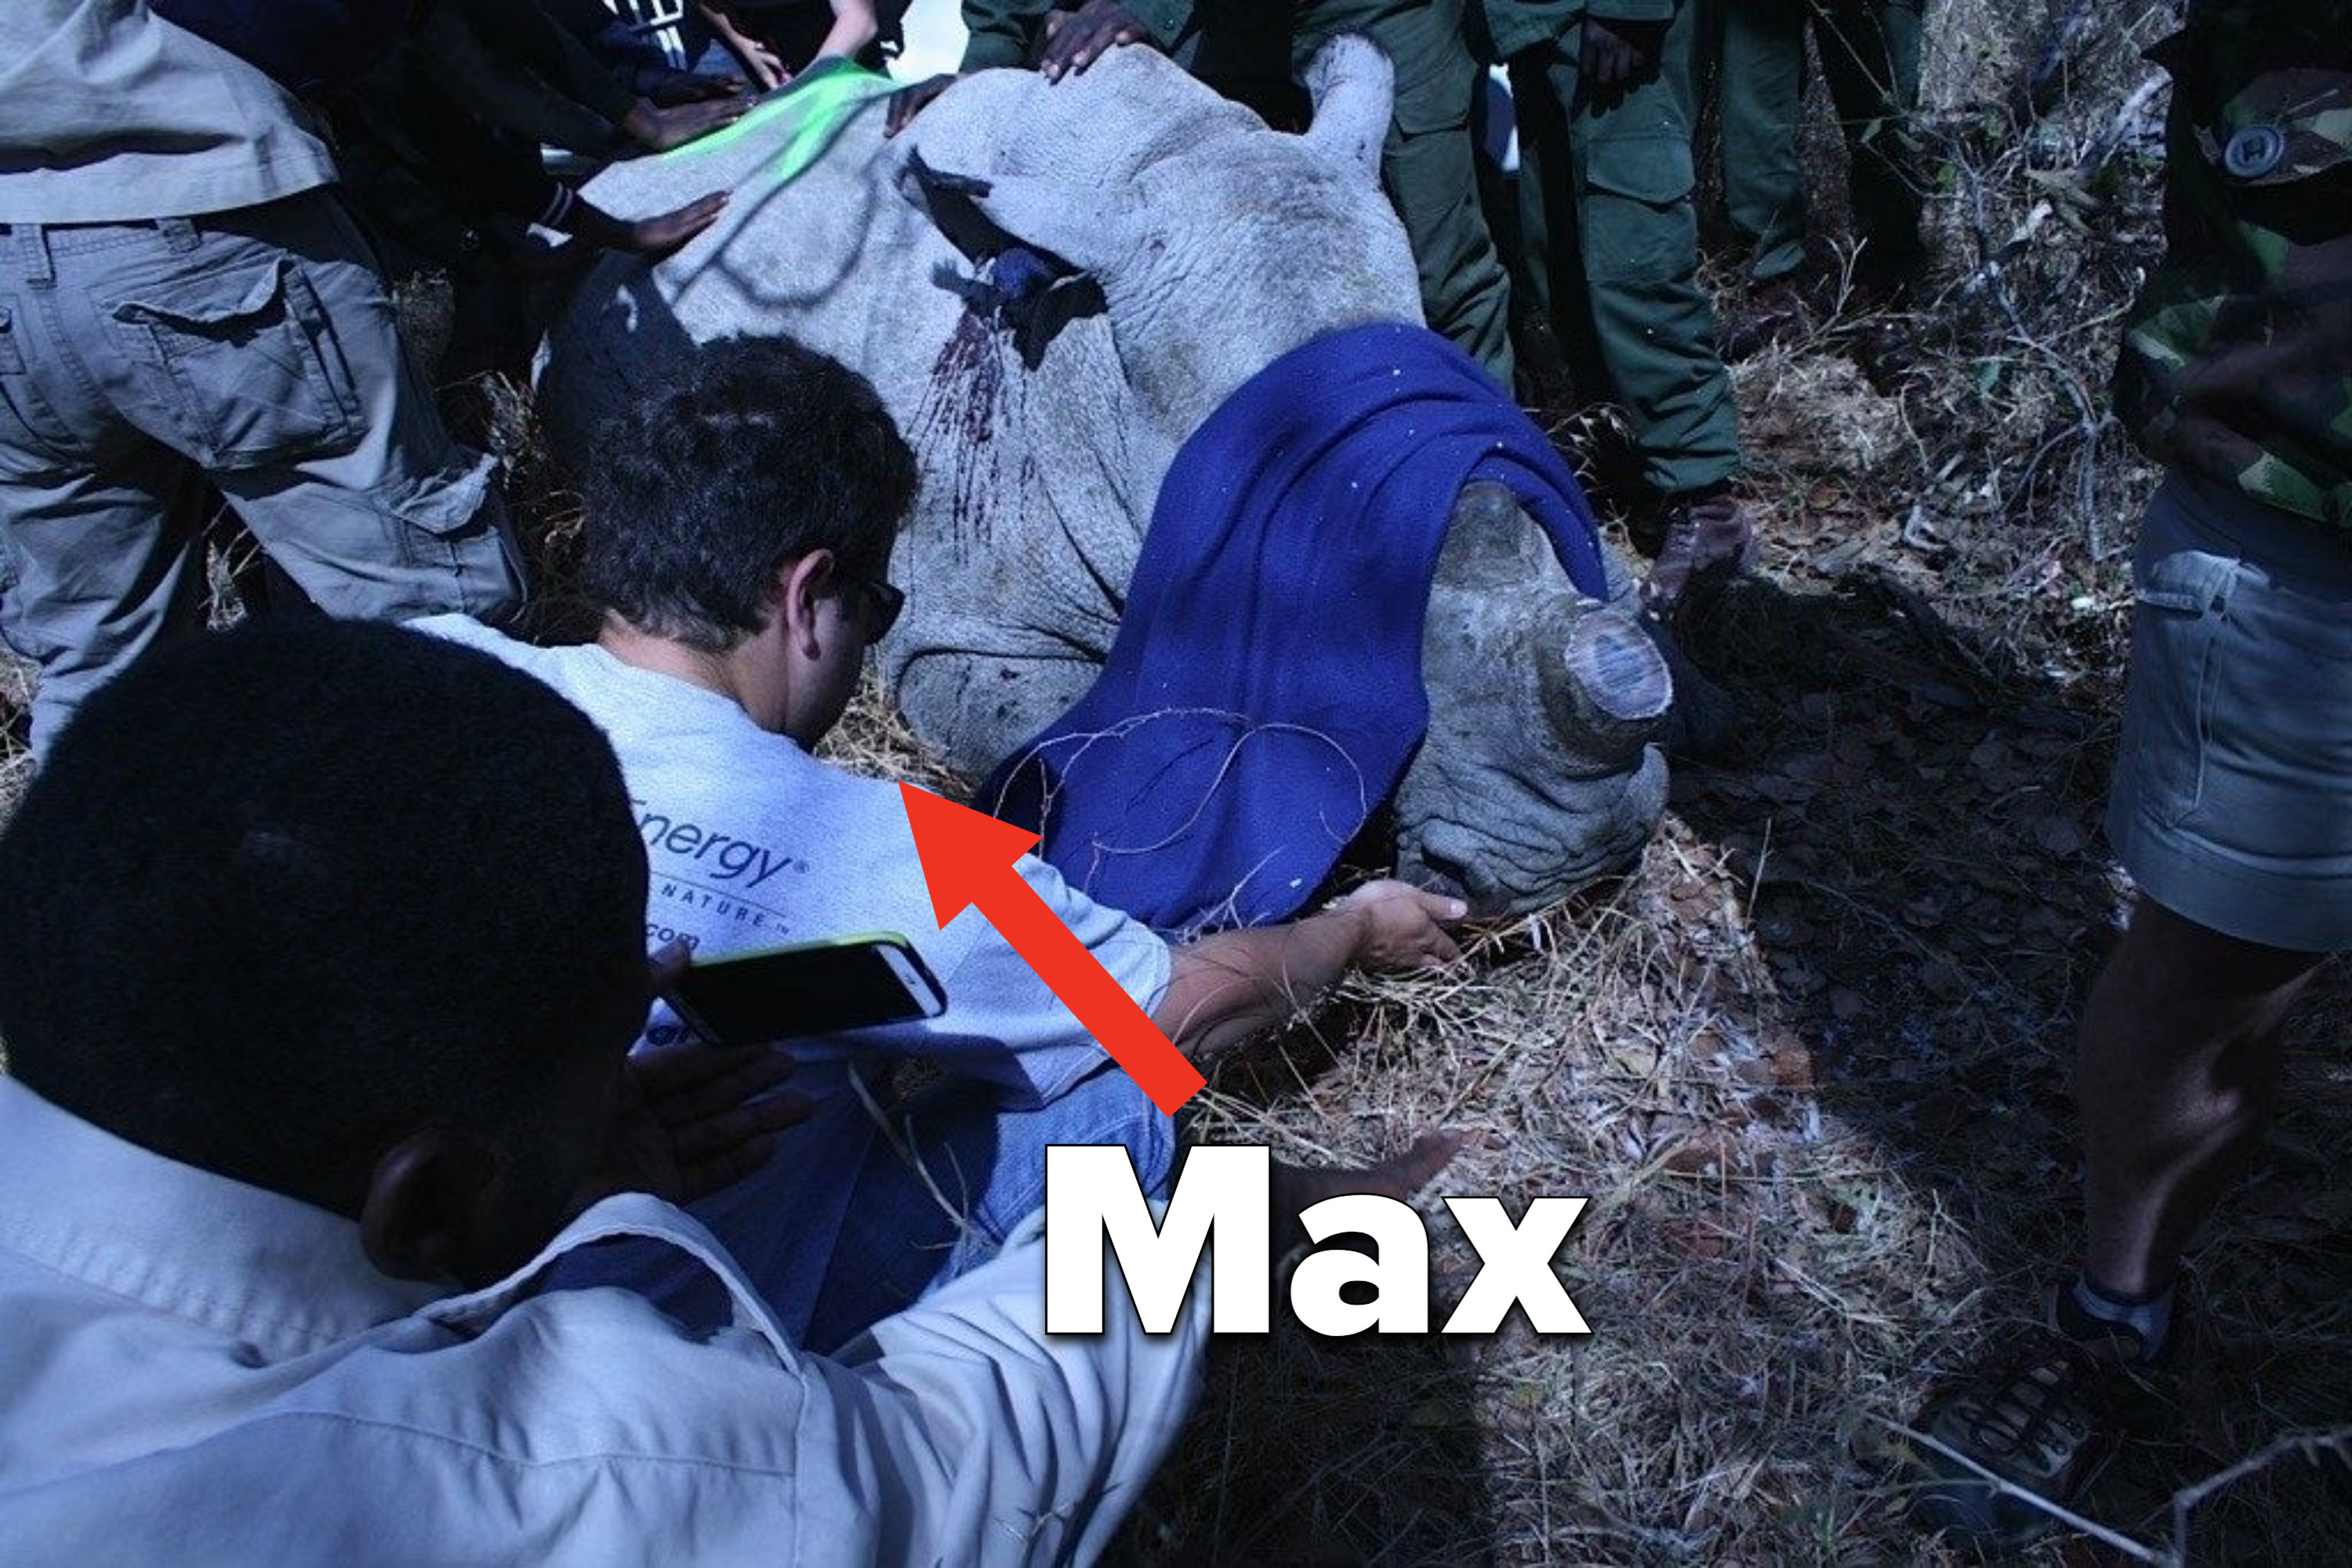 Max helping care for an injured rhino